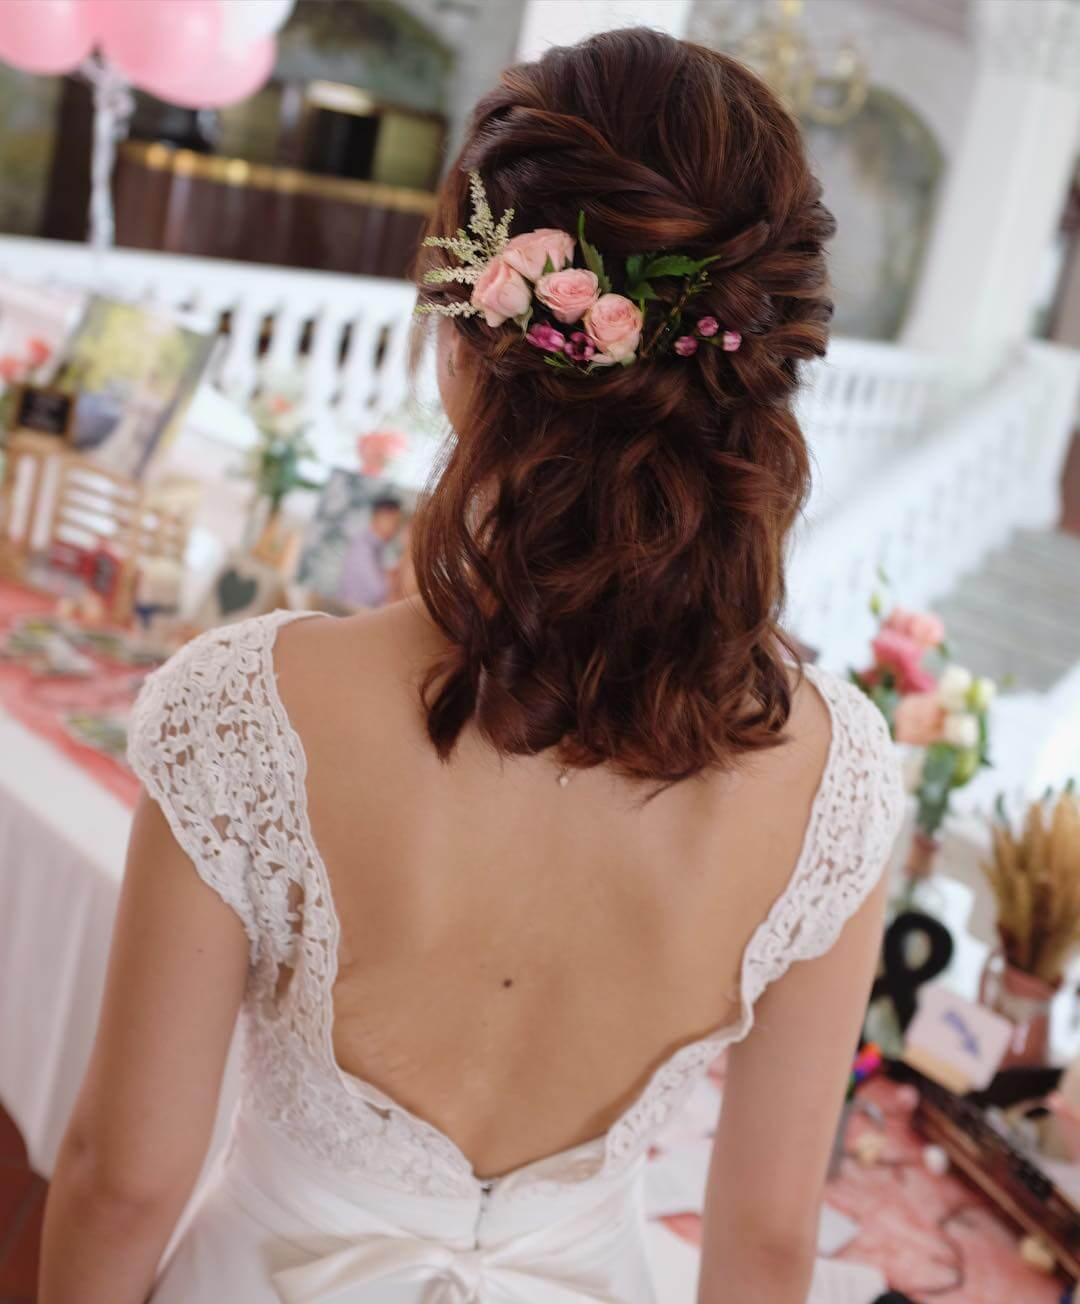 Wedding Hairstyle For Curly Hair
 25 Curly Wedding Hairstyle Ideas Designs